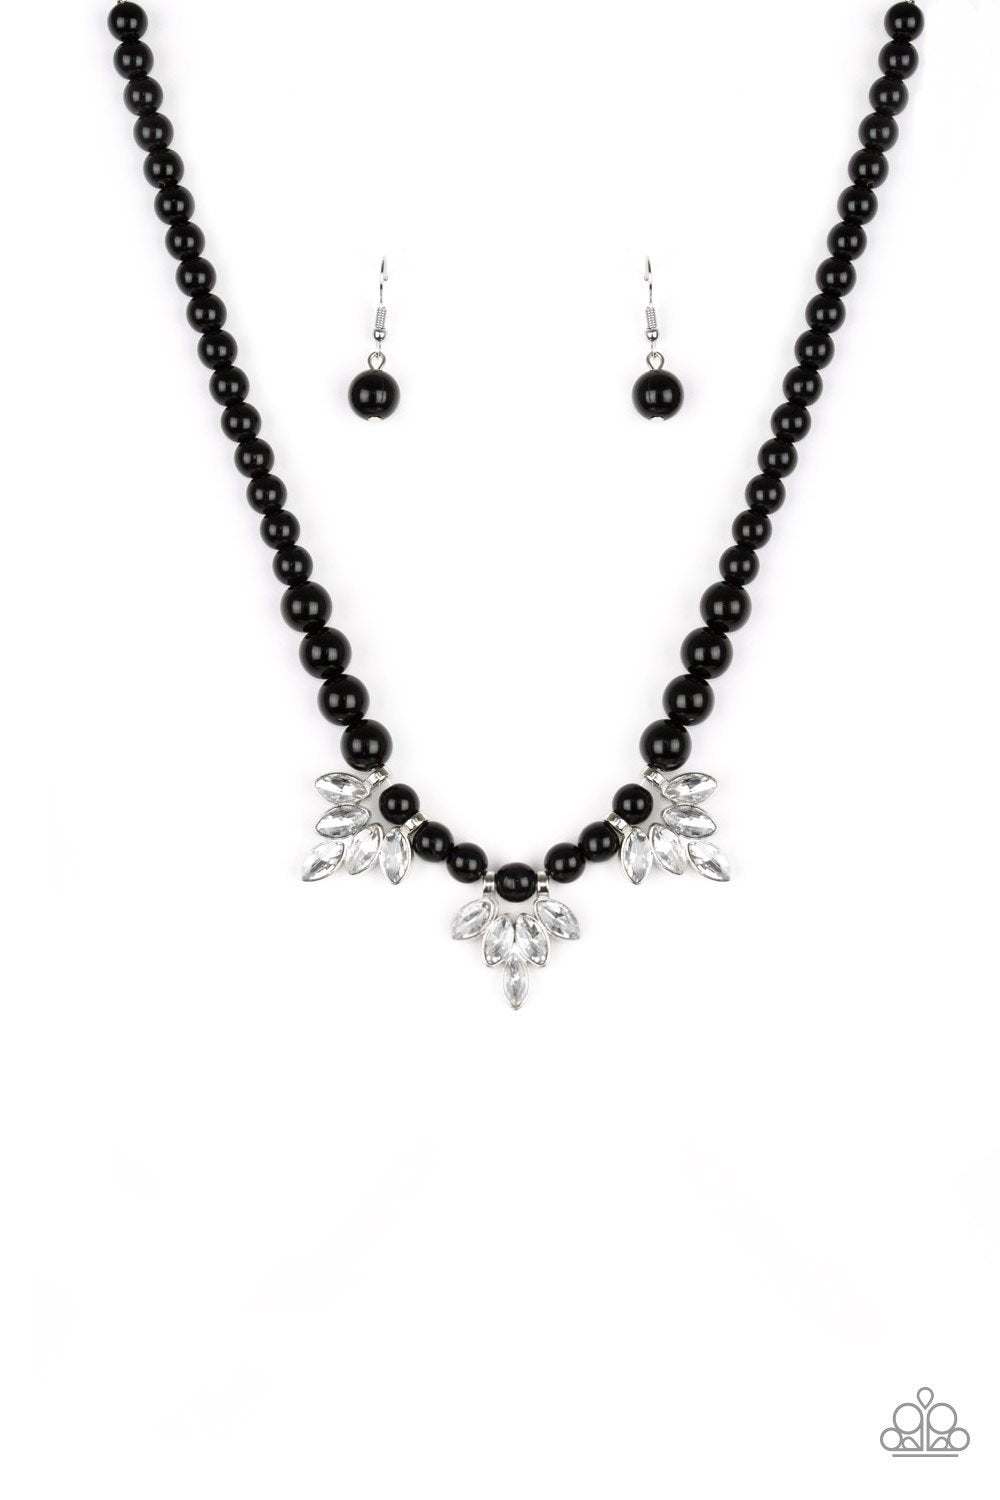 Society Socialite Black Pearl Necklace - Paparazzi Accessories-CarasShop.com - $5 Jewelry by Cara Jewels